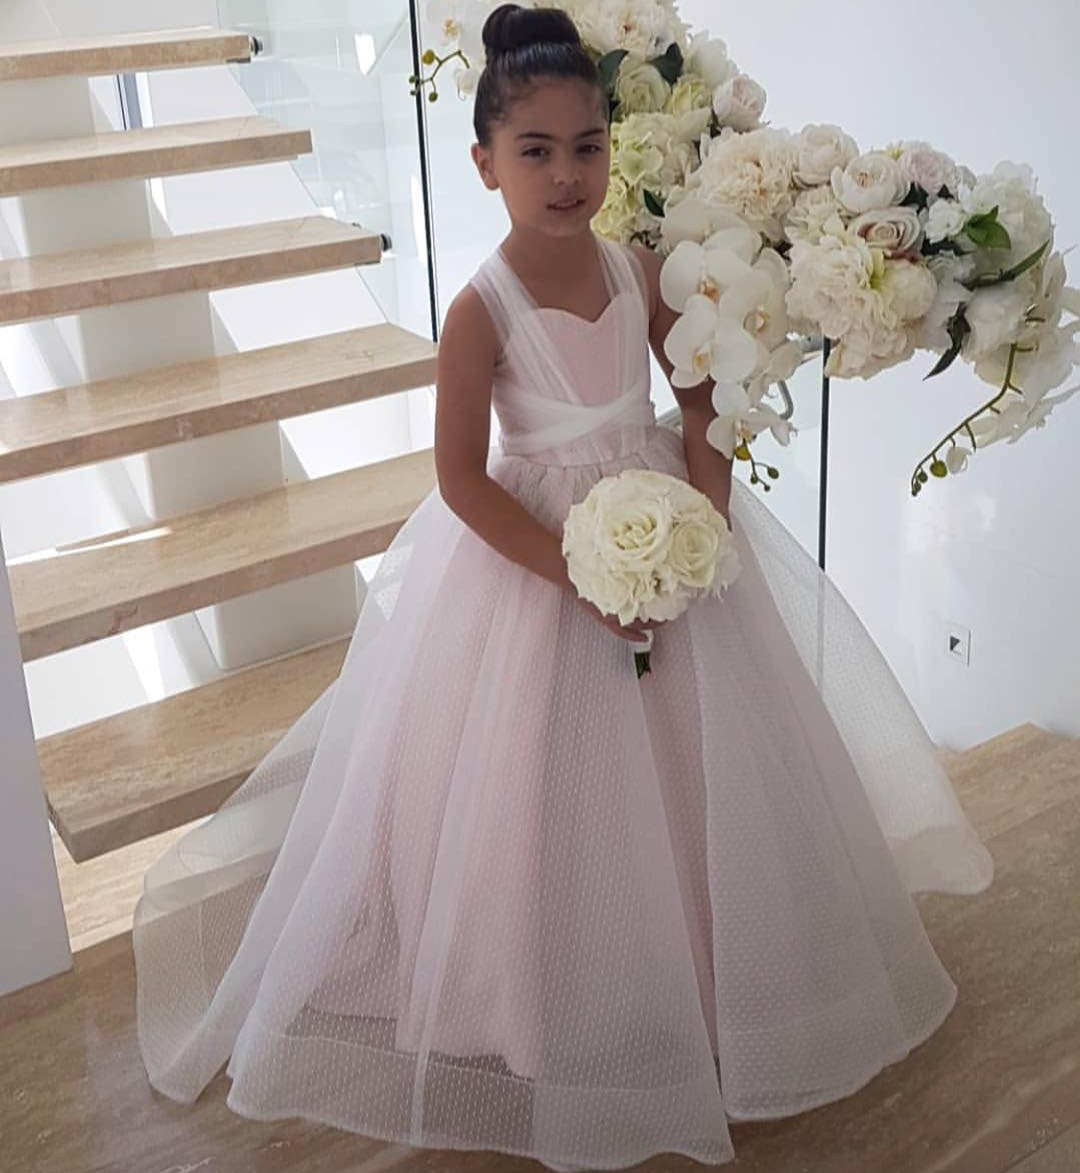 

Hot Sale Ball Gown Flower Girl Dresses For Weddings Lace Up Back Toddler Pageant Gowns Tulle Sweep Train First Communion Dress, Burgundy